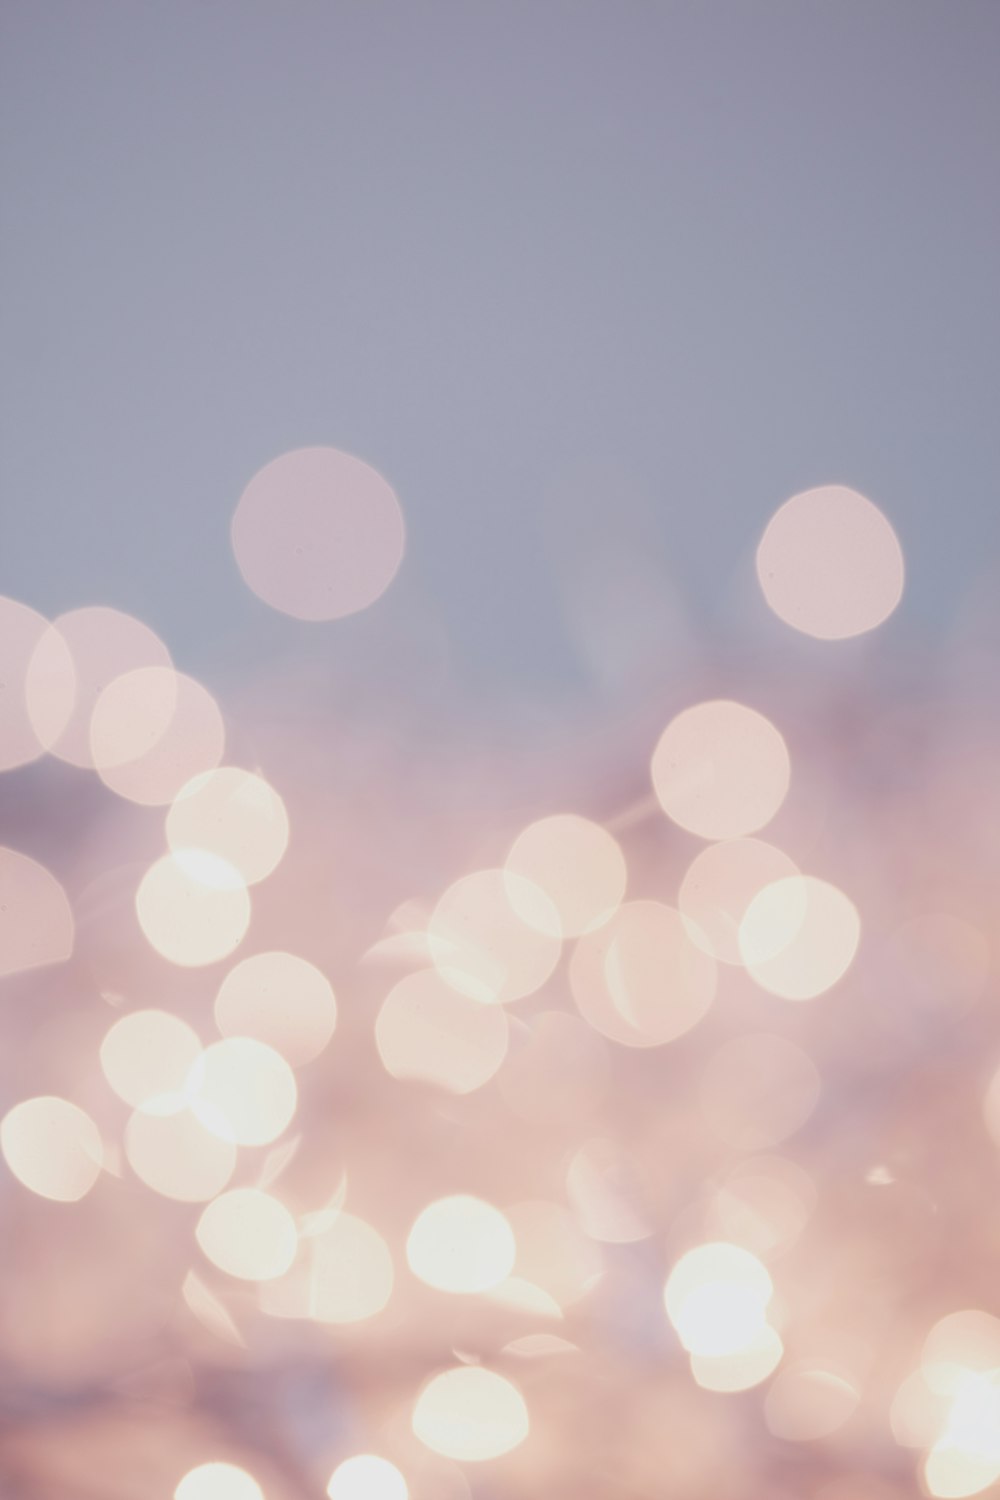 500+ Stunning Bokeh Pictures [HD] | Download Free Images & Stock Photos on  Unsplash